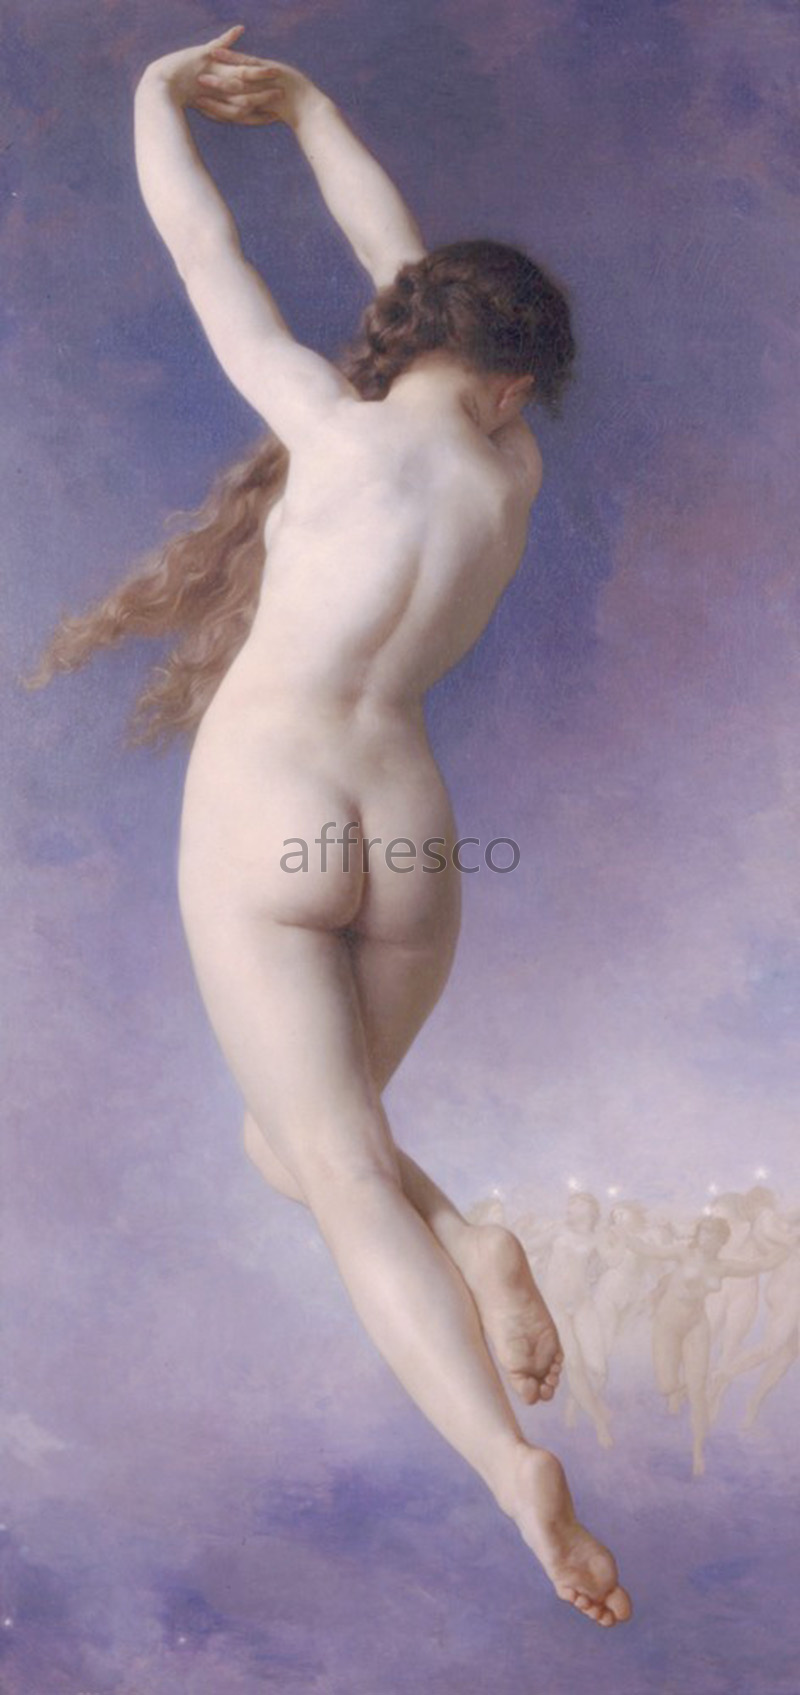 Classical antiquity themes | William Adolphe Bouguereau Lost Pleiad | Affresco Factory